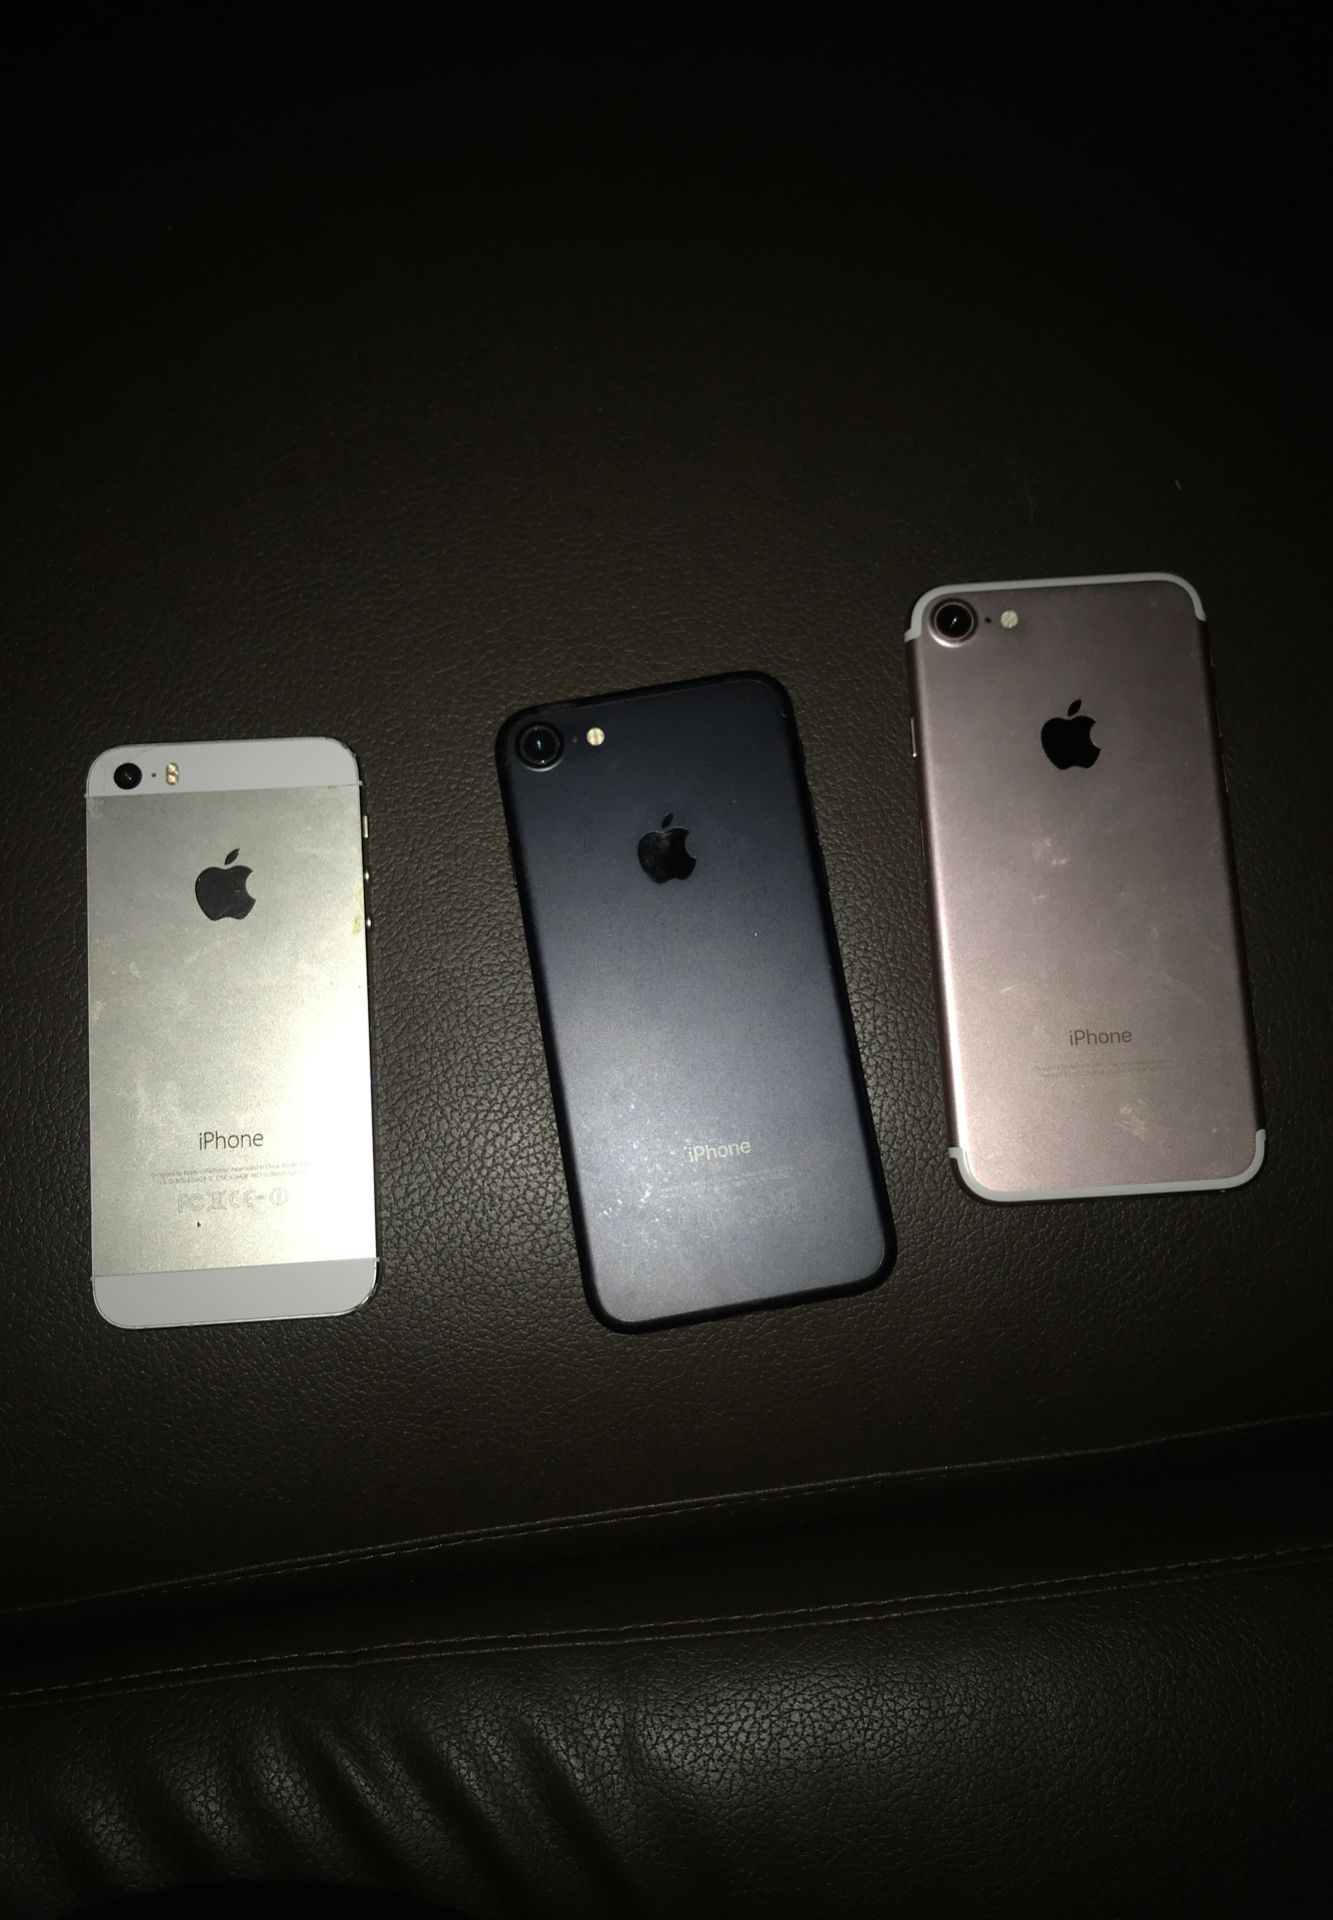 Two iPhones 7 and one iPhone 5